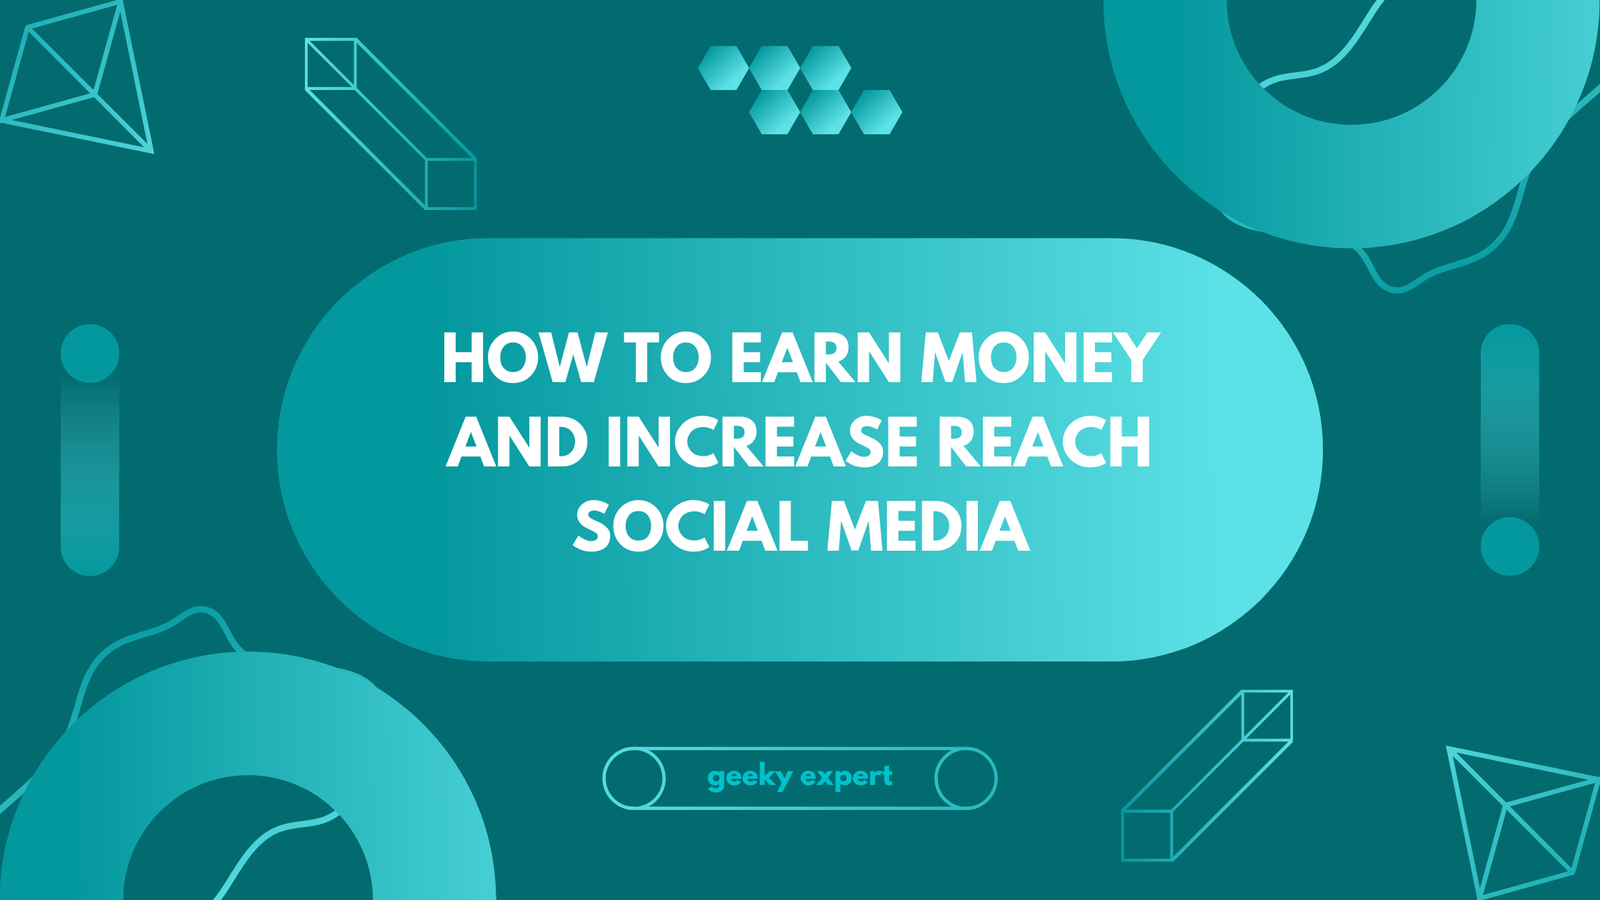 You are currently viewing How to Earn Money and Increase Reach on Instagram, Facebook, Snapchat, and Other Social Media